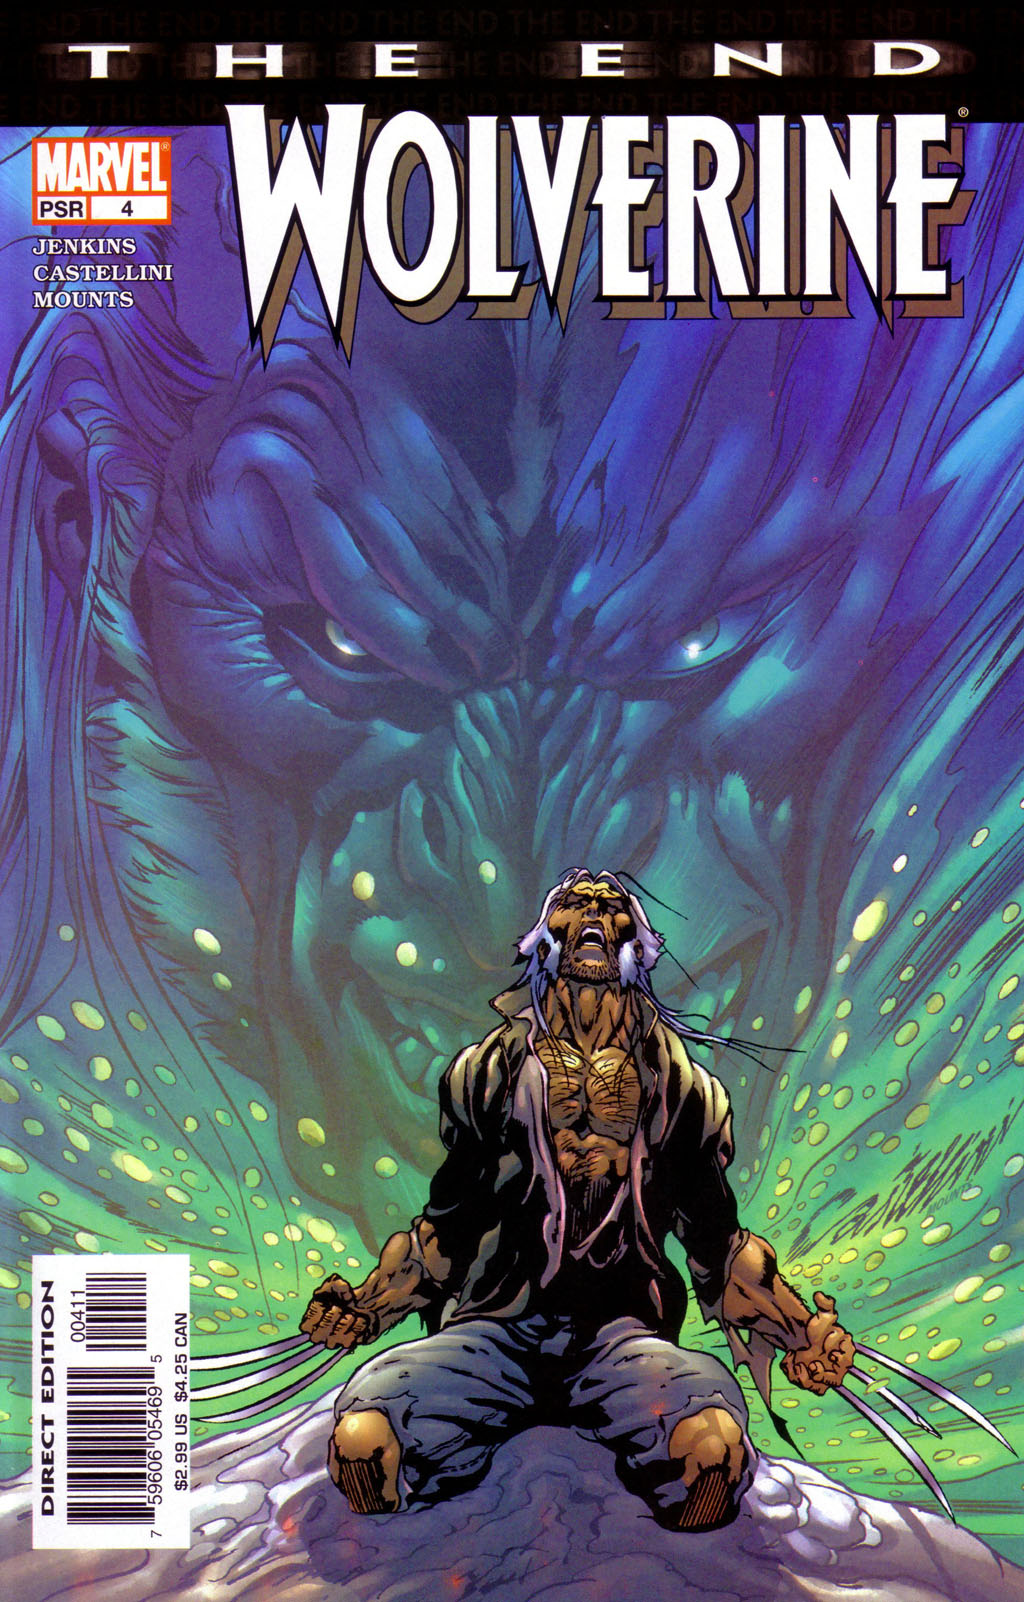 Wolverine: The End Vol. 1 #4